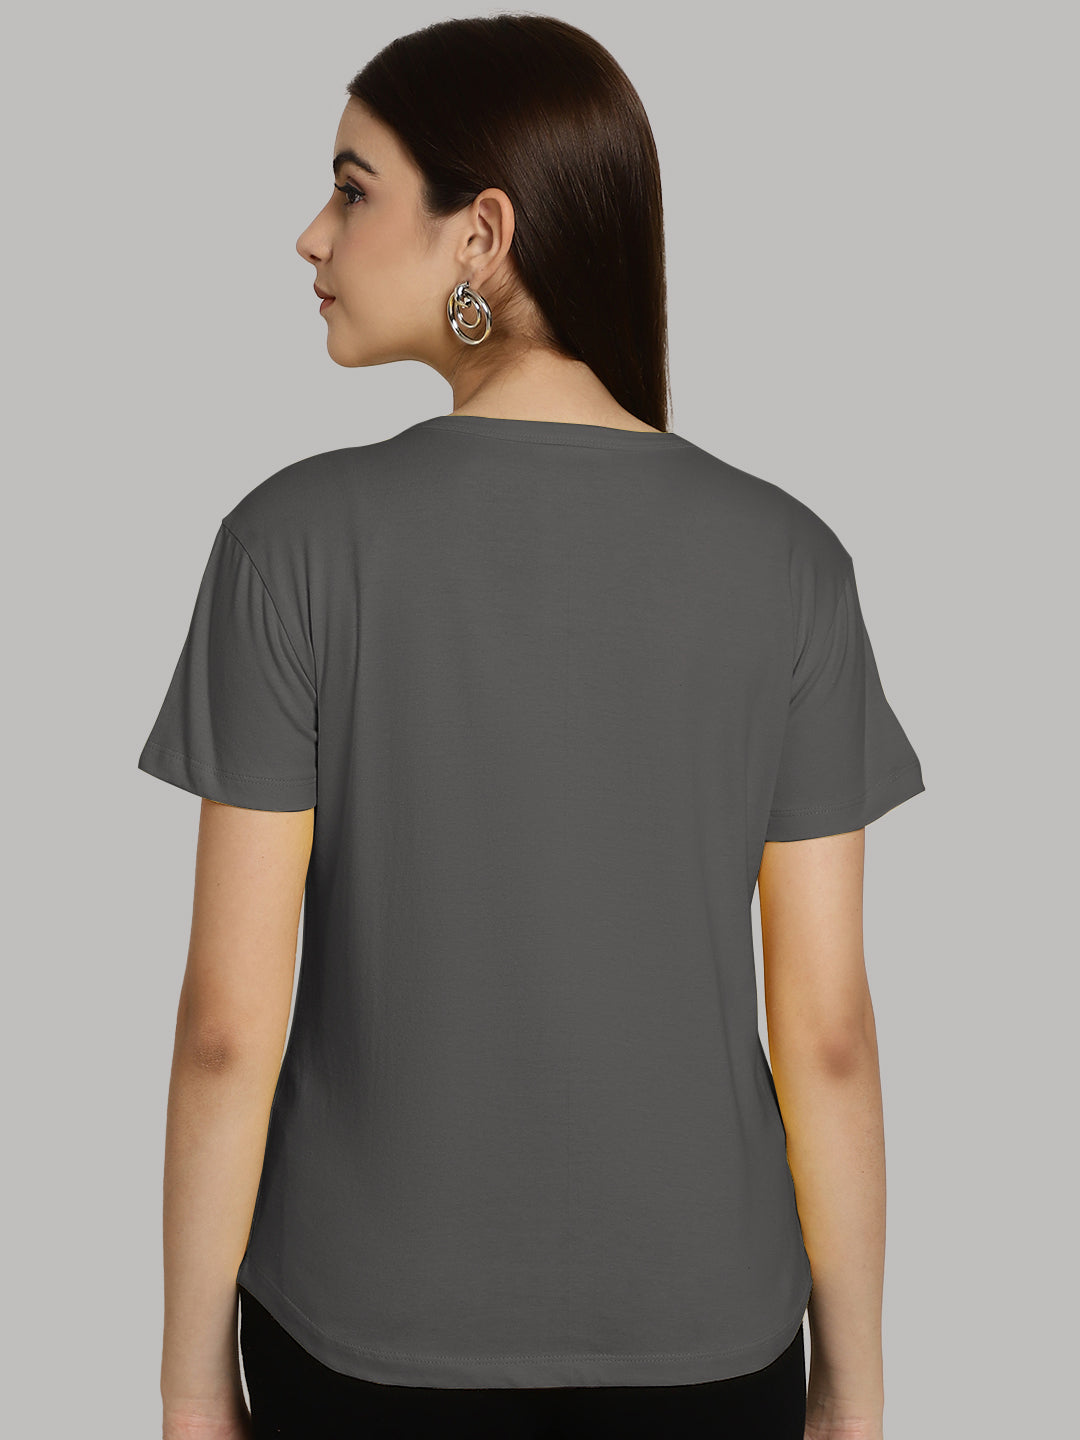 Friskers Solid Women Round Neck Half Sleeves T-Shirt - Friskers